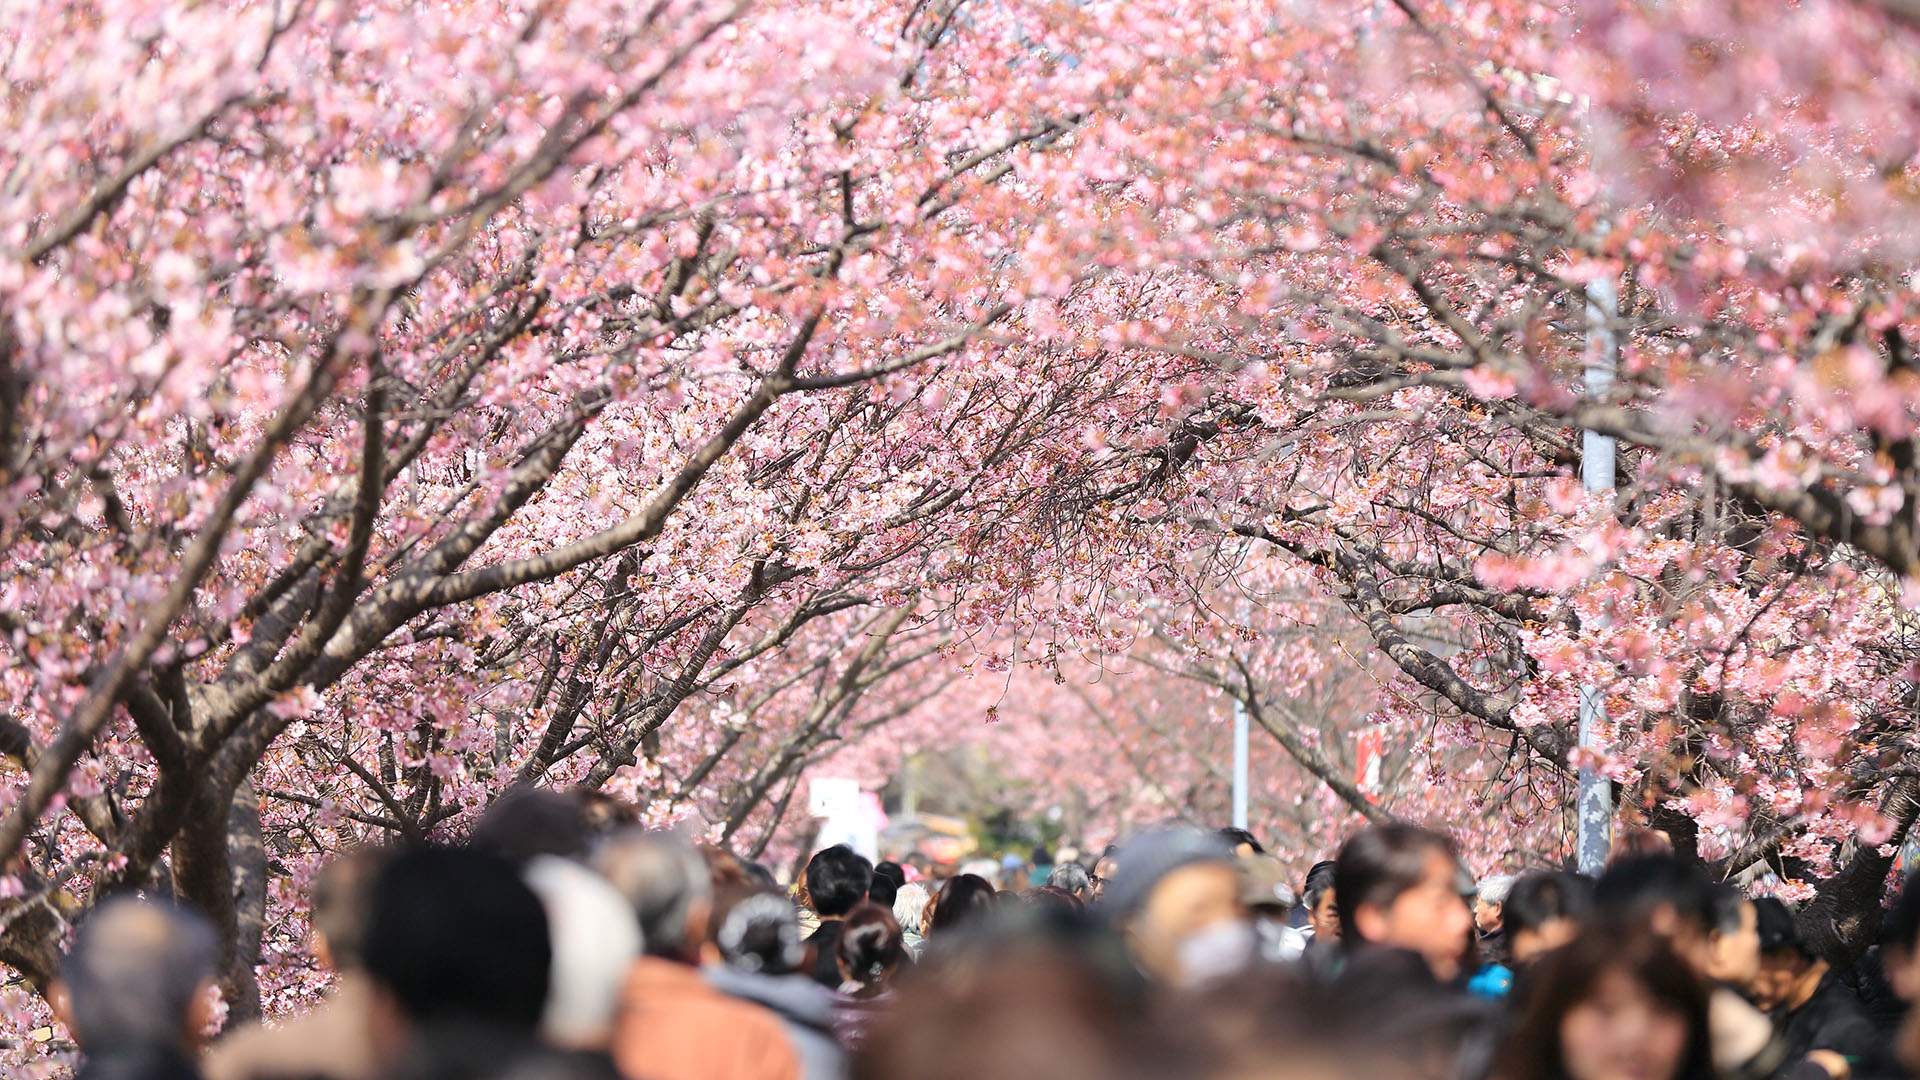 We're Giving Away a VIP Experience at the Sydney Cherry Blossom